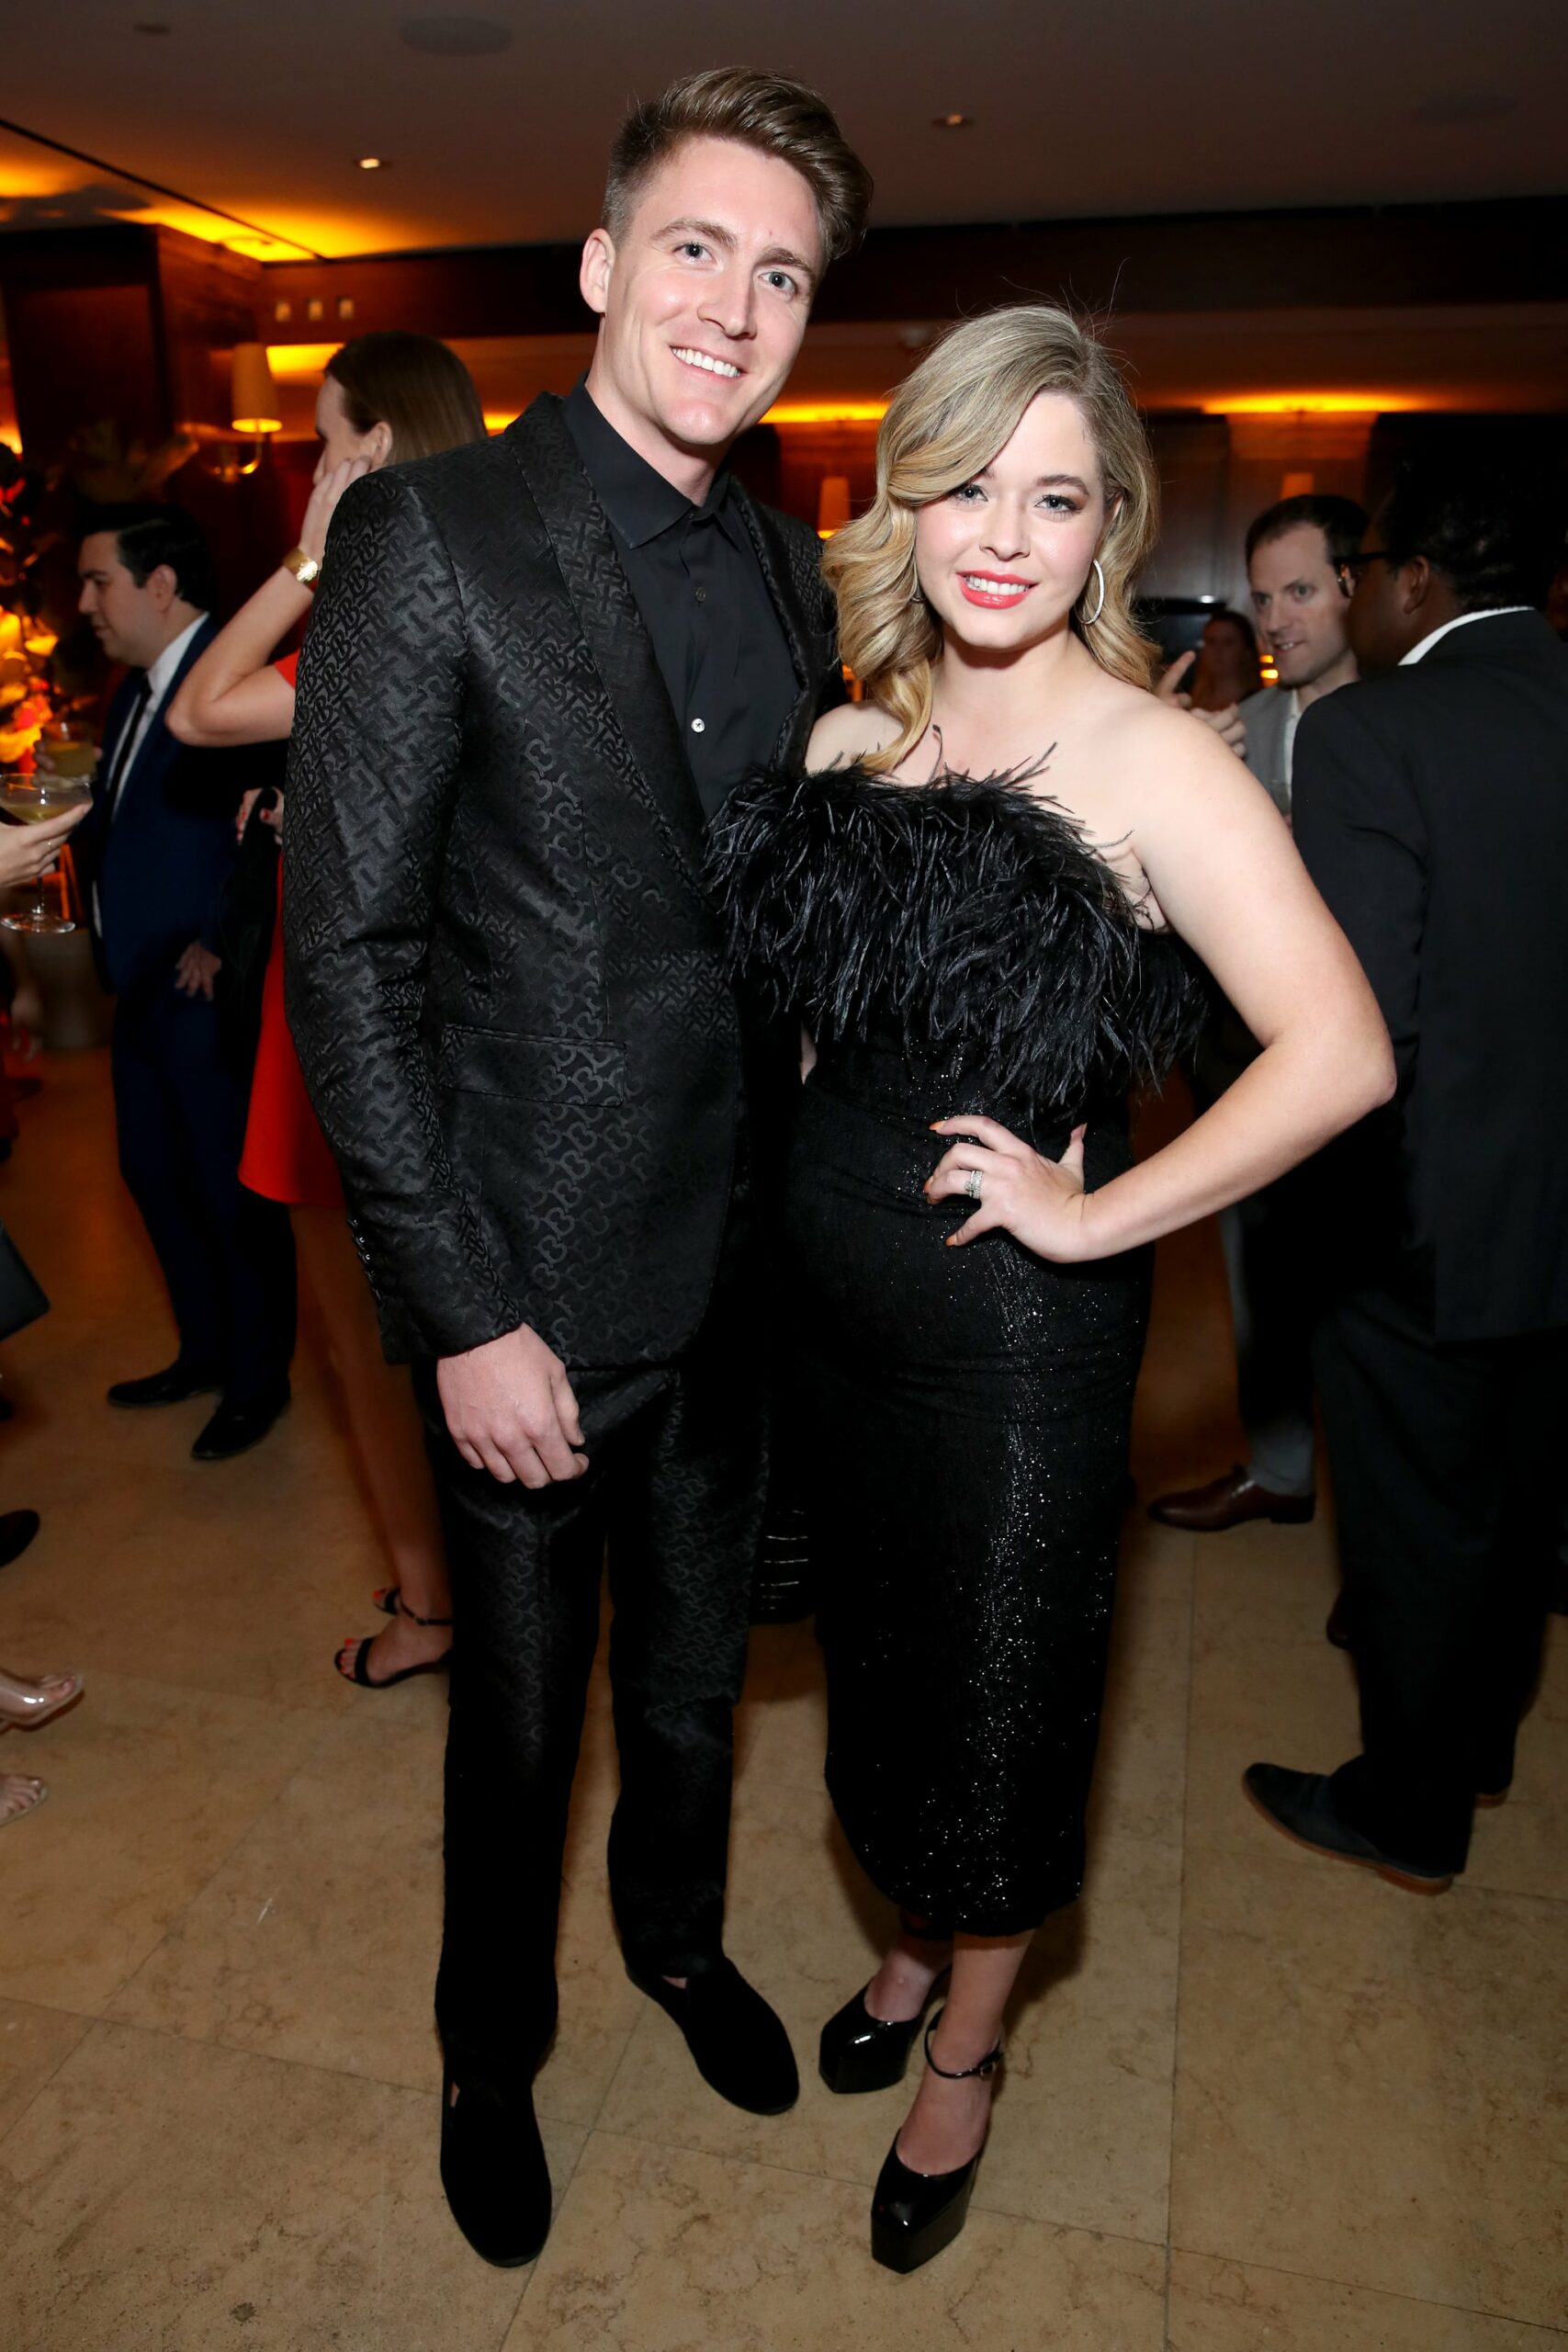 BEVERLY HILLS, CALIFORNIA - SEPTEMBER 20: (L-R Hudson Sheaffer and Sasha Pieterse attend the 2019 Pre-Emmy Party hosted by Entertainment Weekly and L'Oreal Paris at Sunset Tower Hotel in Los Angeles on Friday, September 20, 2019. (Photo by Randy Shropshire/Getty Images for Entertainment Weekly)